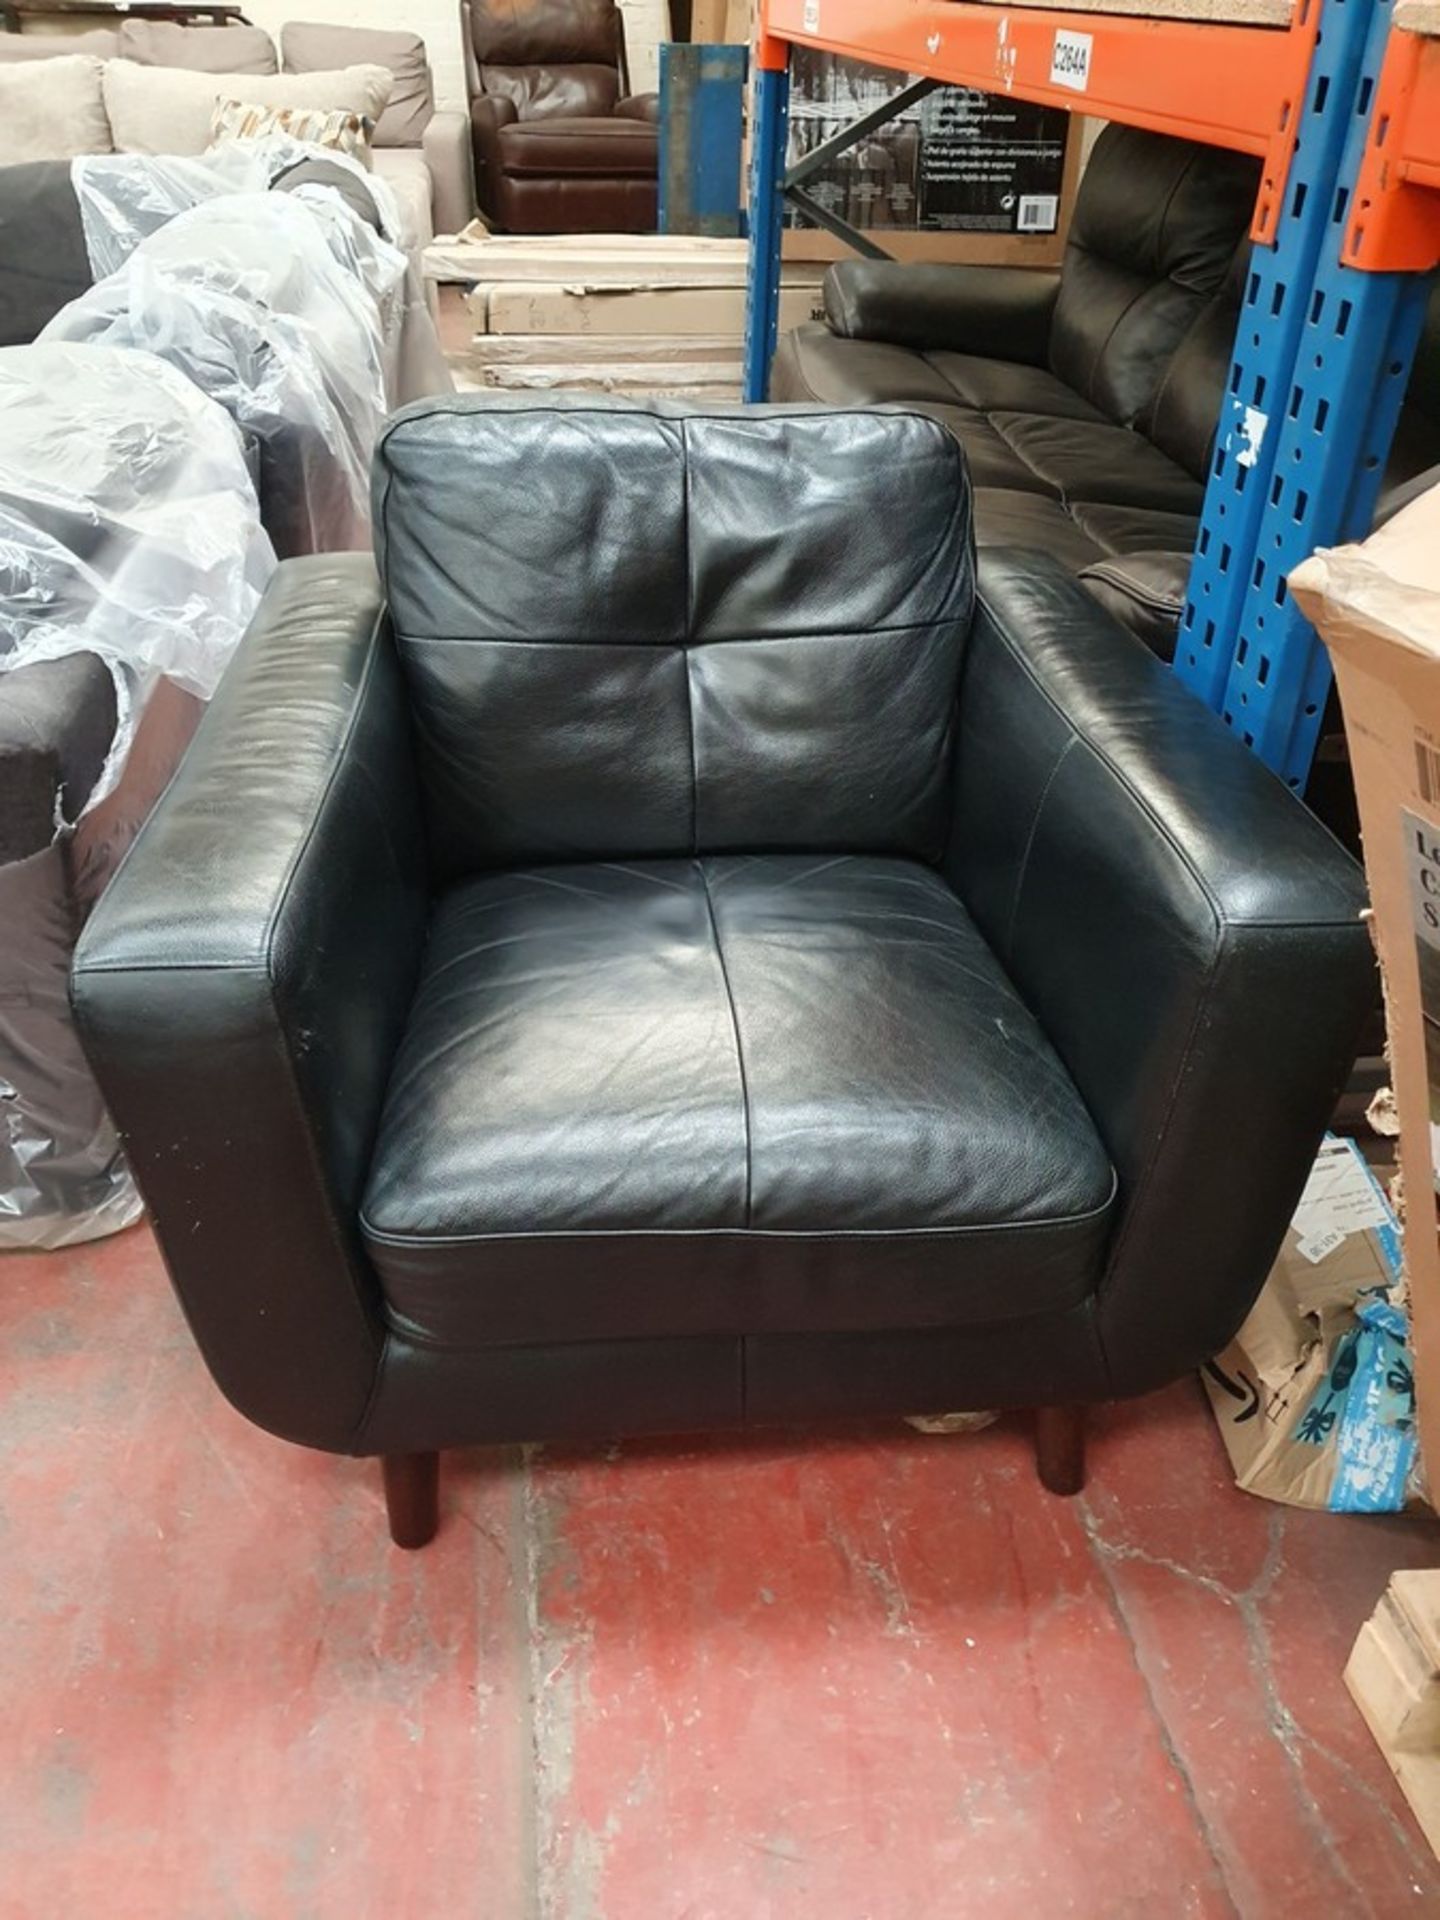 Lounge set of a 3 Seater Black Leather sofa with matching Arm chair, used with a few scratches and - Image 2 of 4